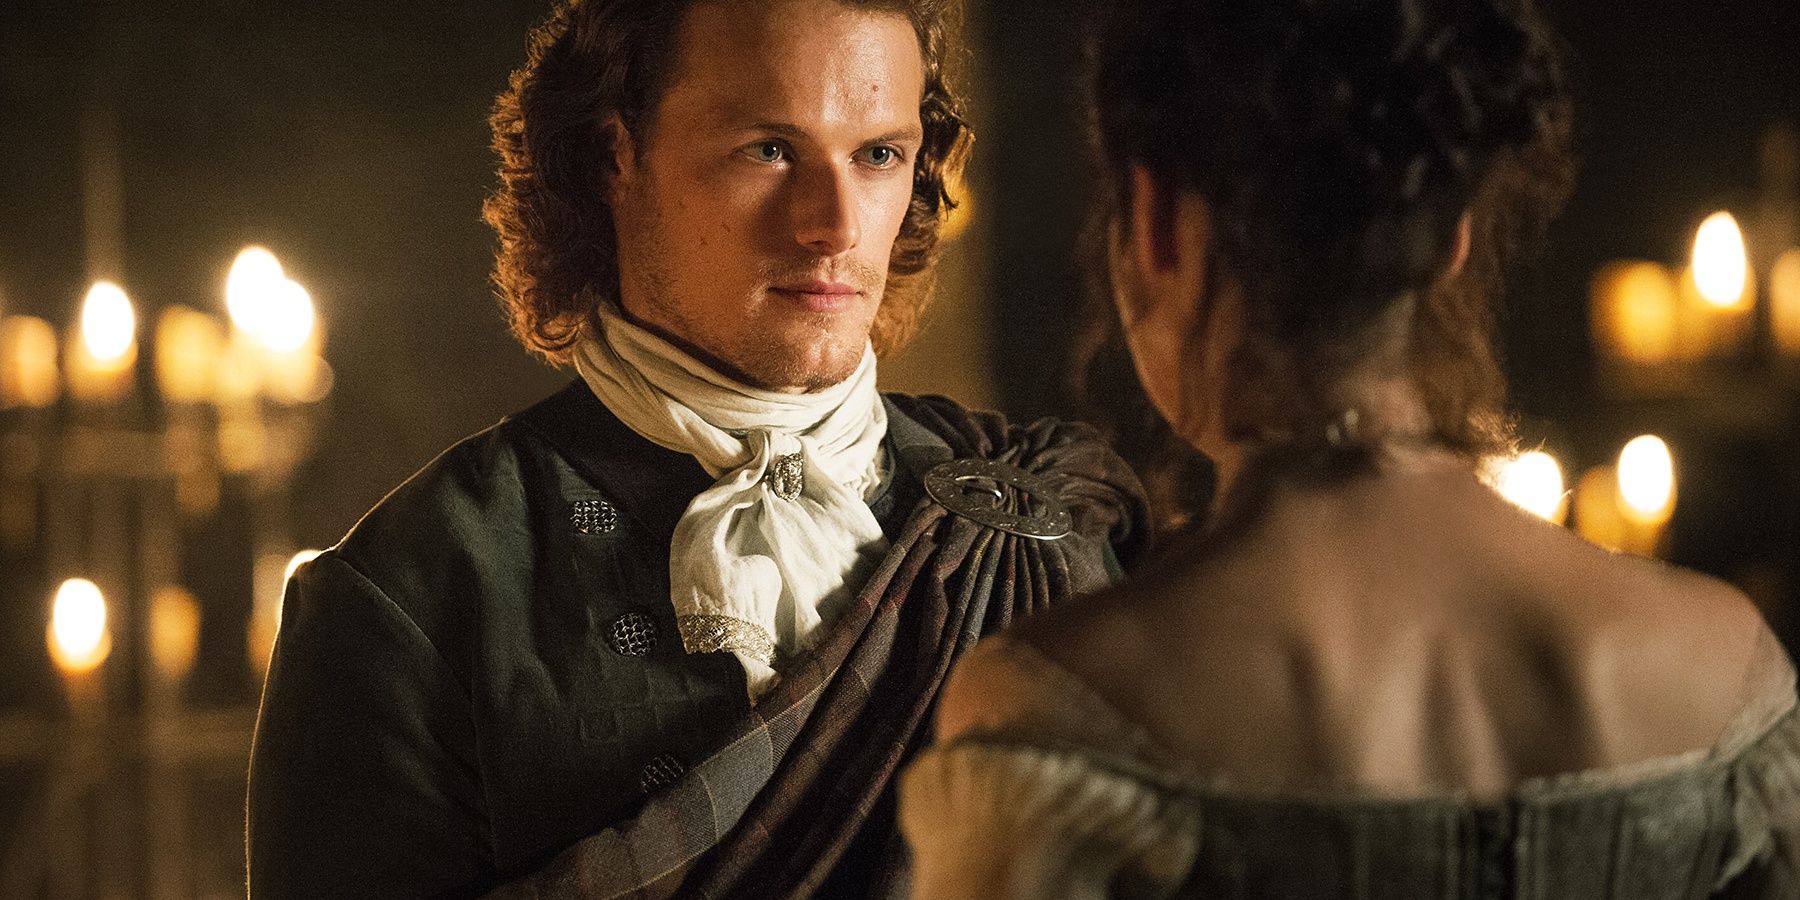 Image of Jamie looking at Claire during wedding in Outlander